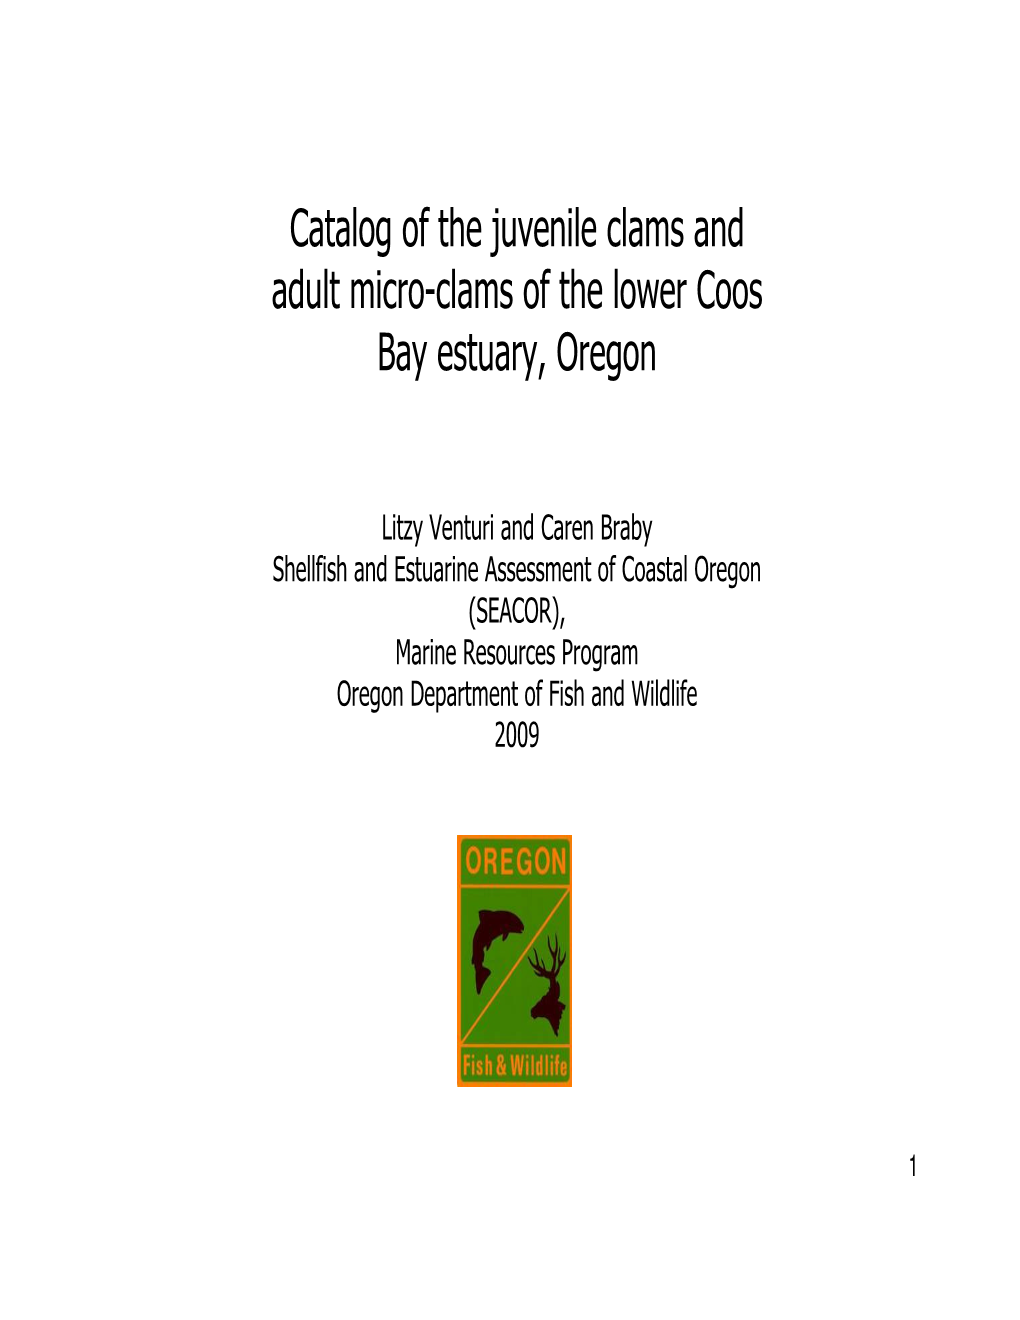 Catalog of the Juvenile Clams and Adult Micro-Clams of the Lower Coos Bay Estuary, Oregon